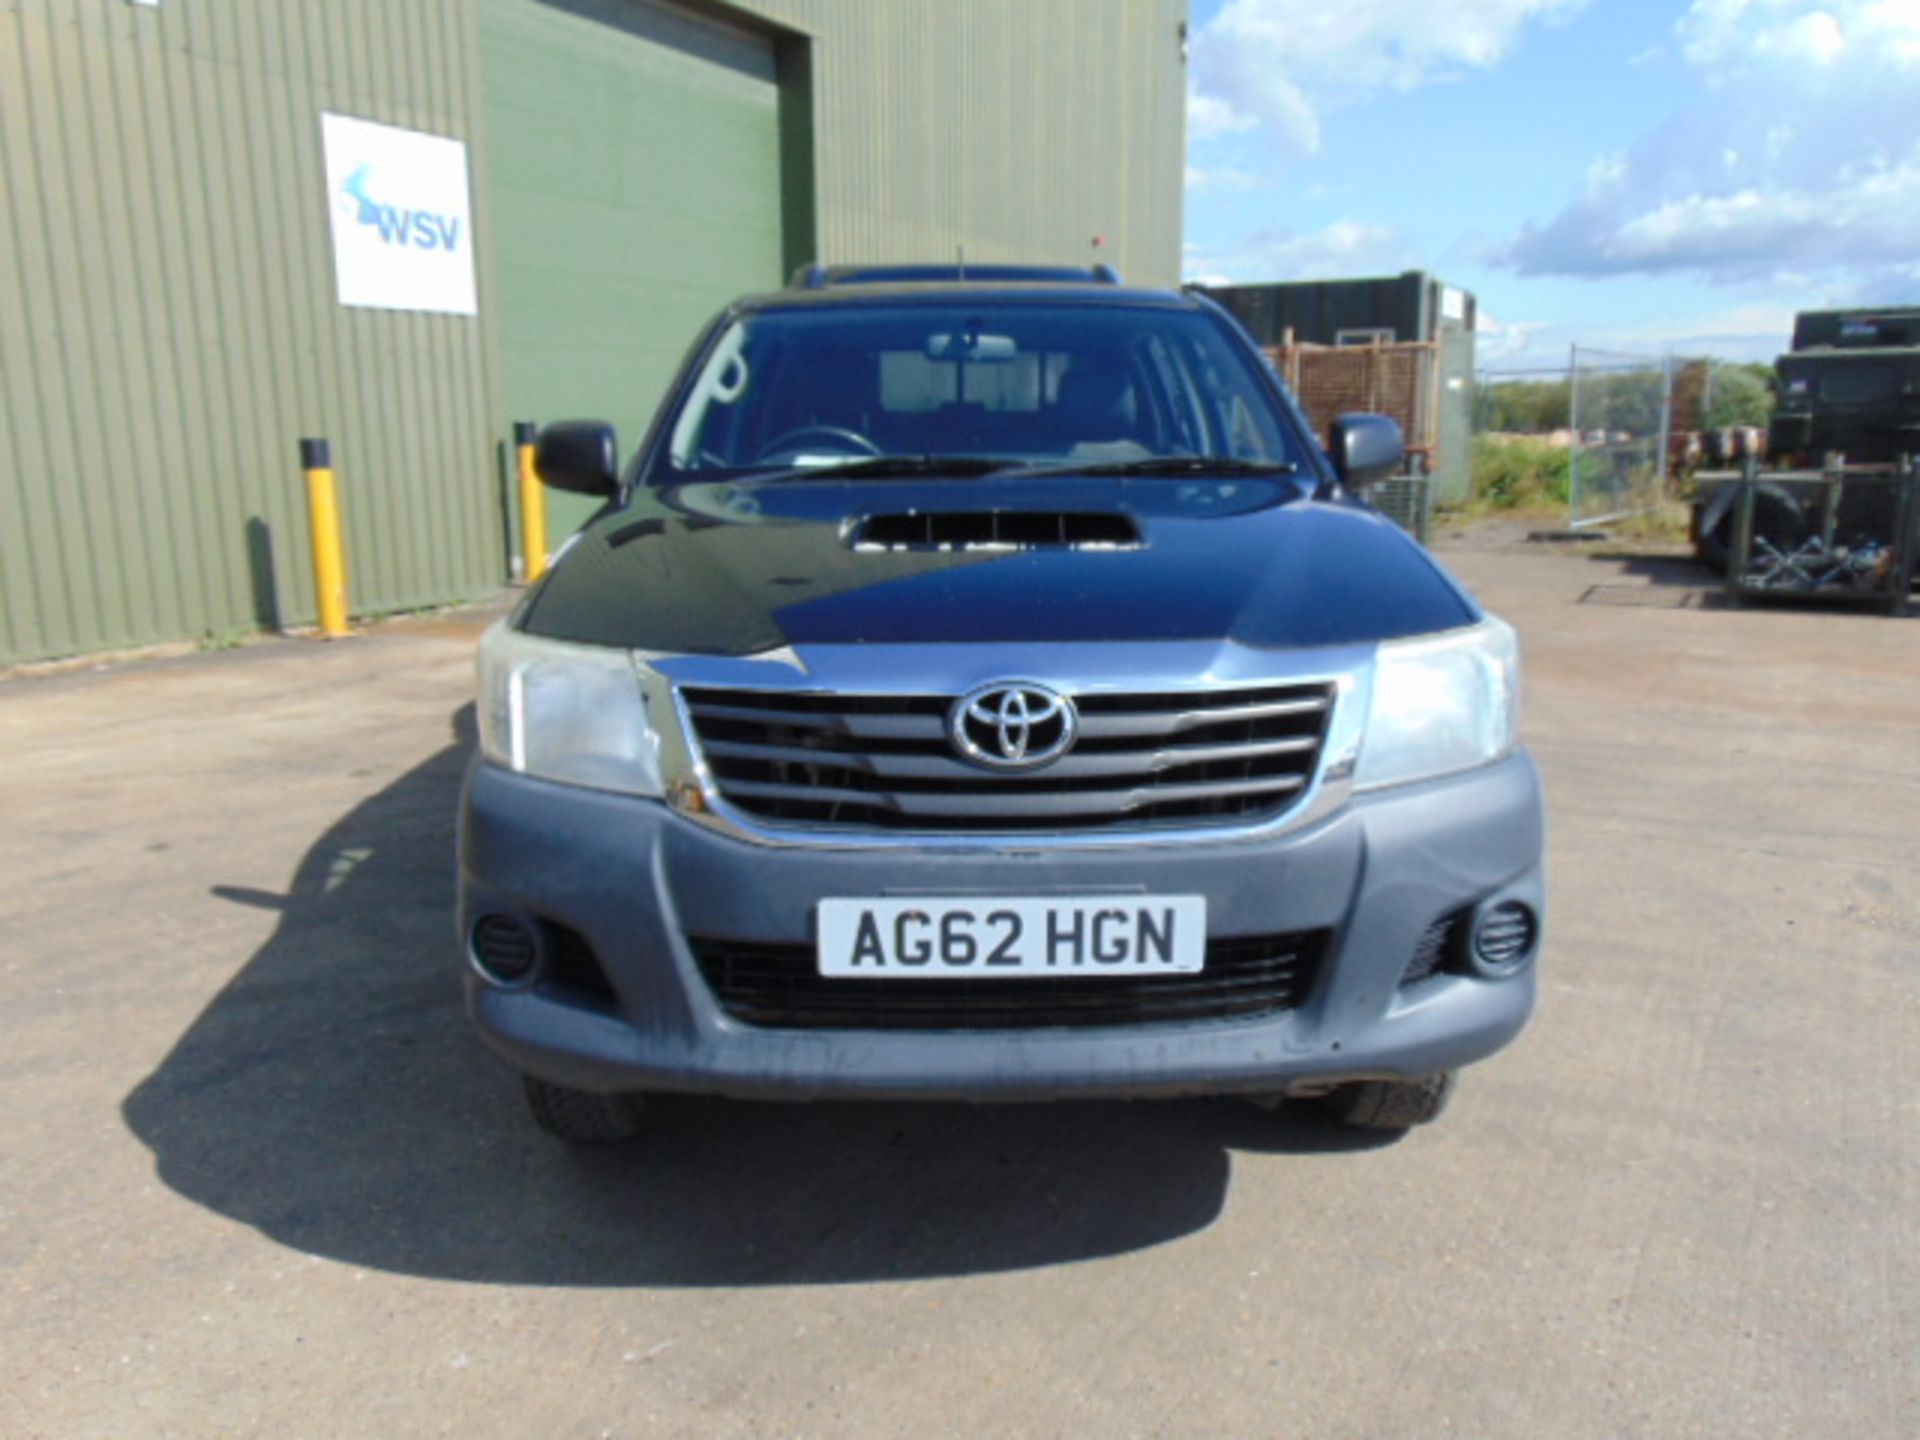 2012 Toyota Hilux HL2 Pick up 4x4 Double Cab with Truckman Hard Top - Image 2 of 41